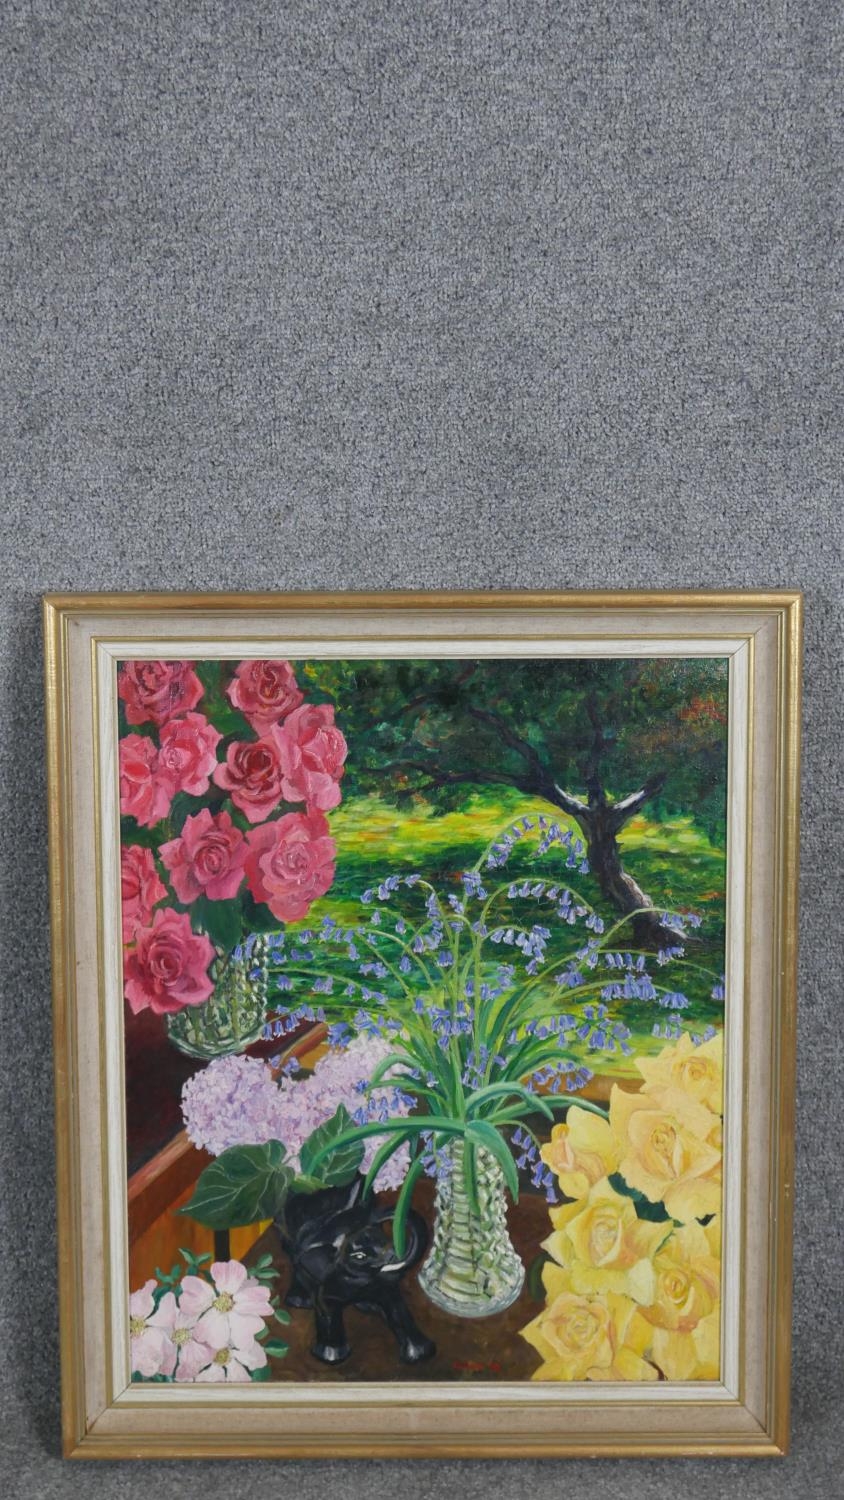 Gerry B Gibbs (b. 1969). A framed oil on board of a still life. Signed Gibbs, dated 1970. H.65 W. - Image 2 of 5